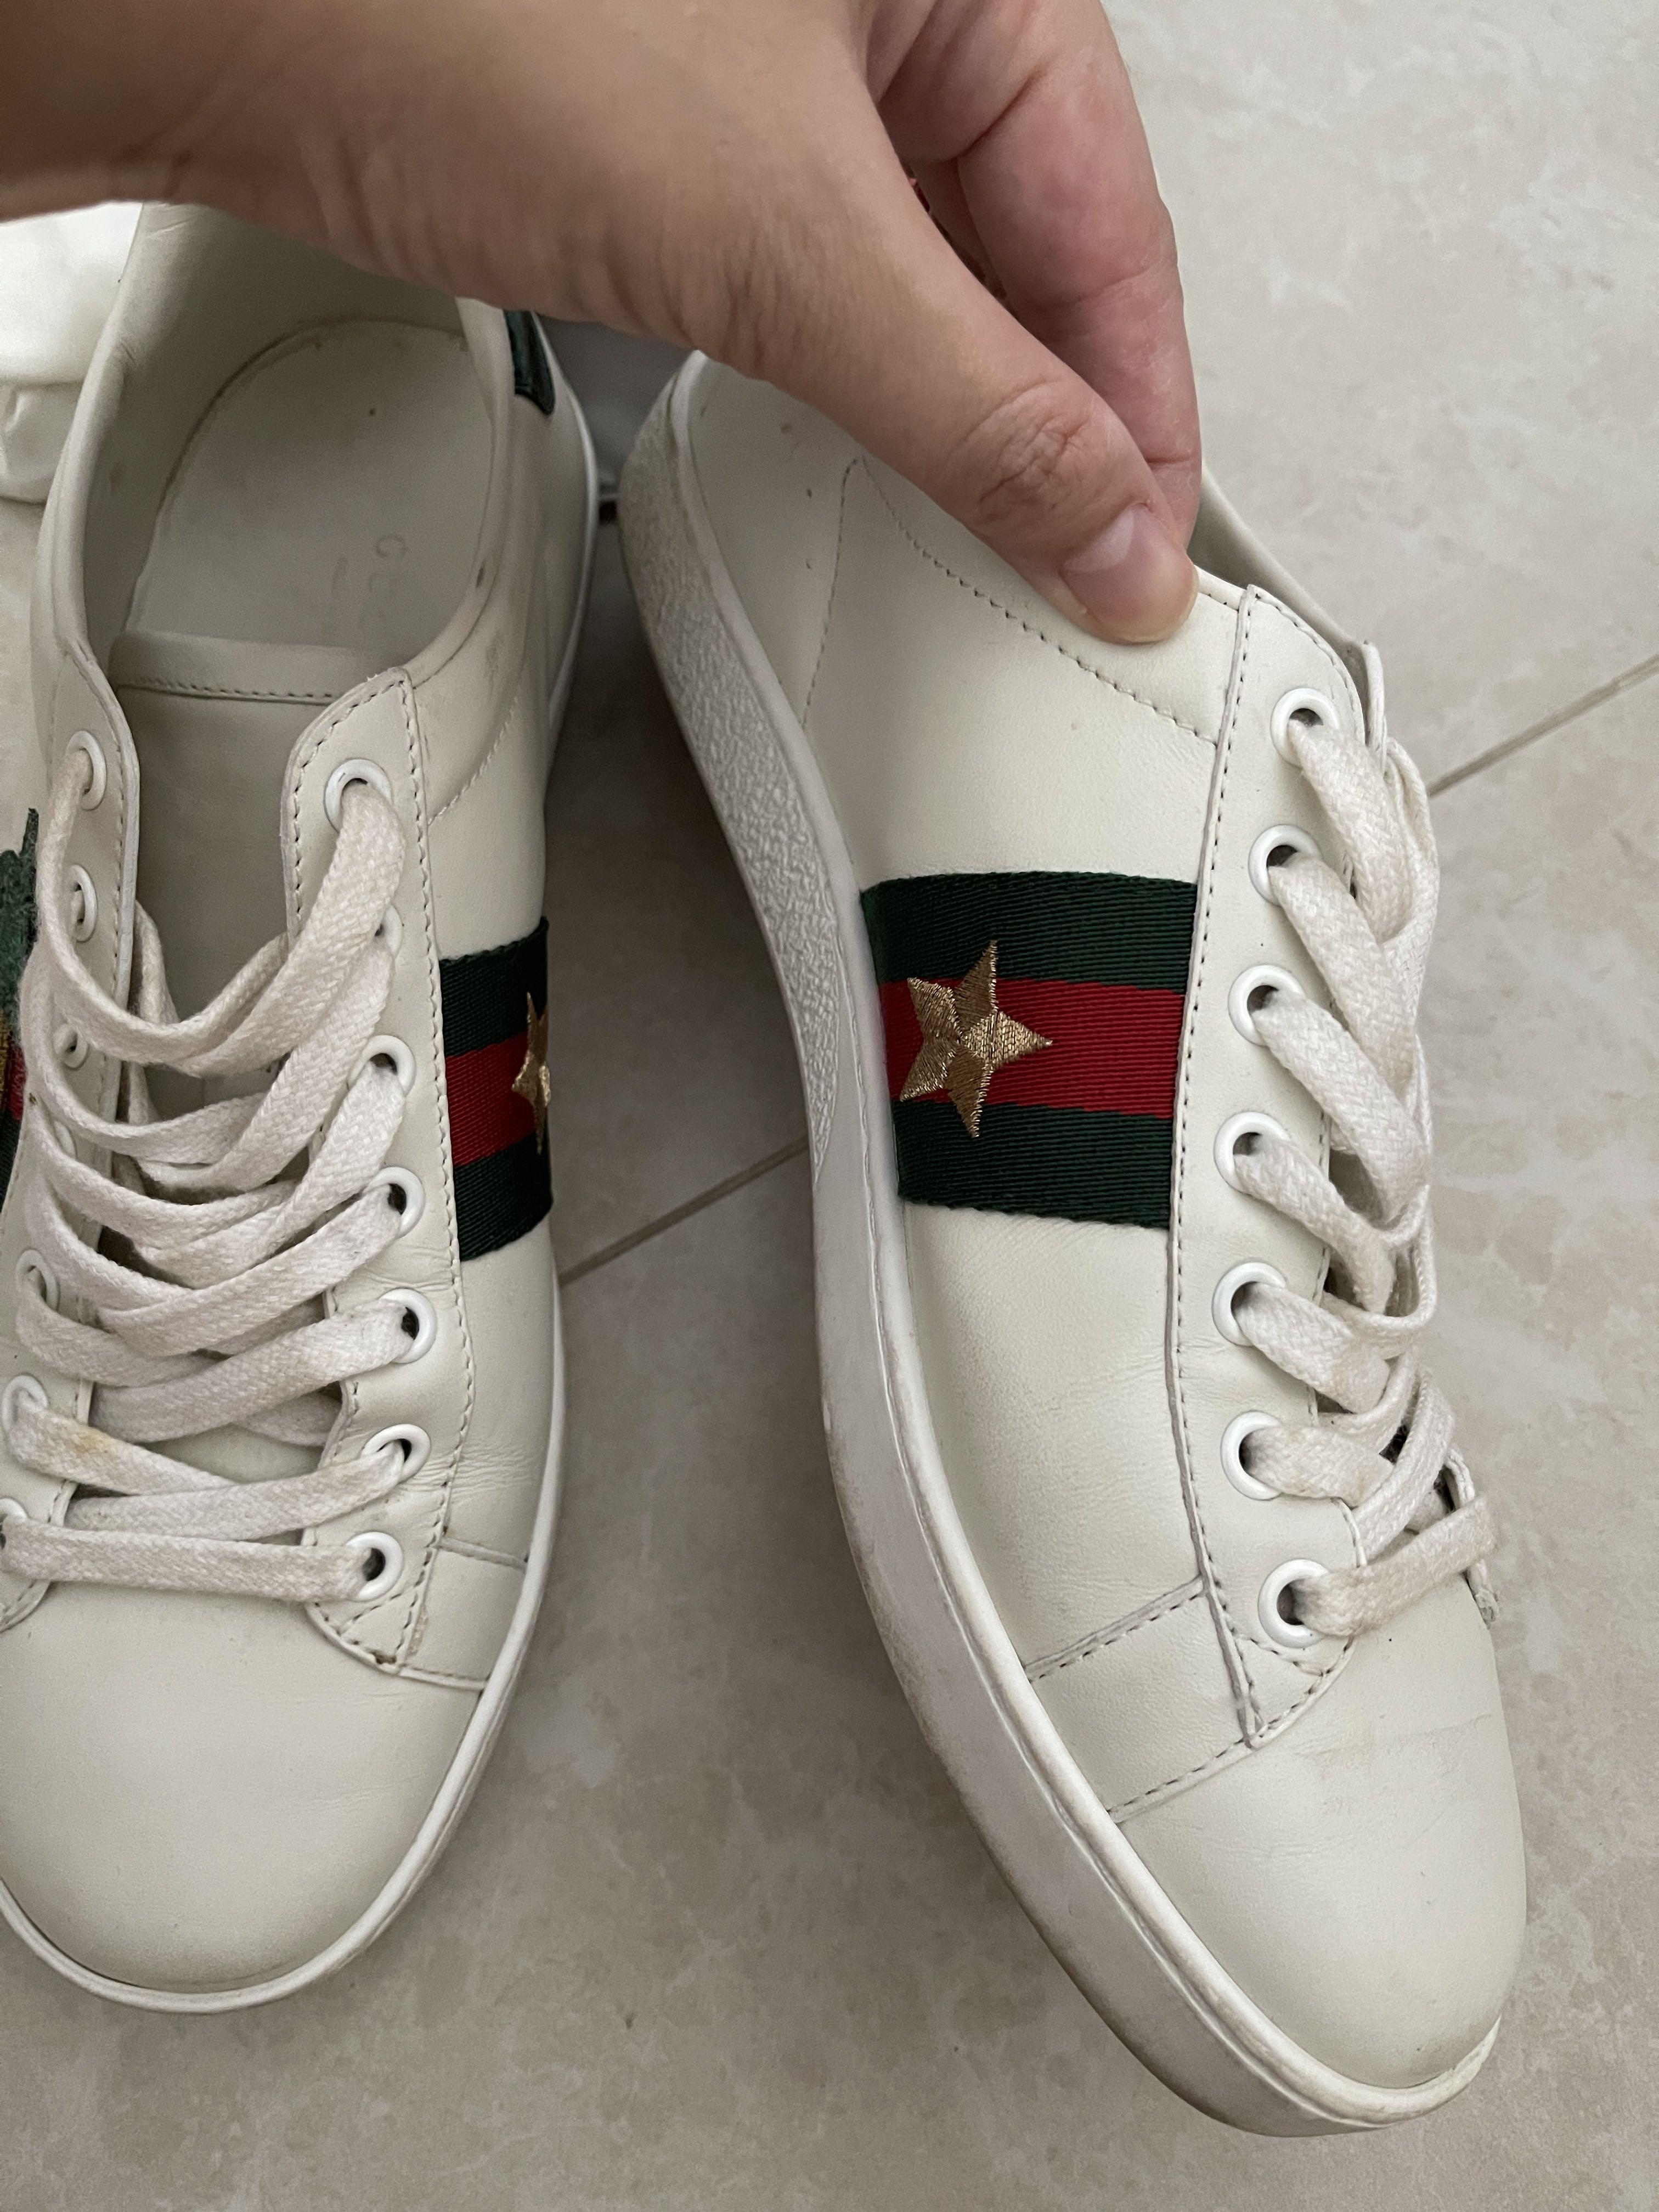 GUCCI Ace Pineapple Ladybug Leather Sneakers Sz 38.5 G